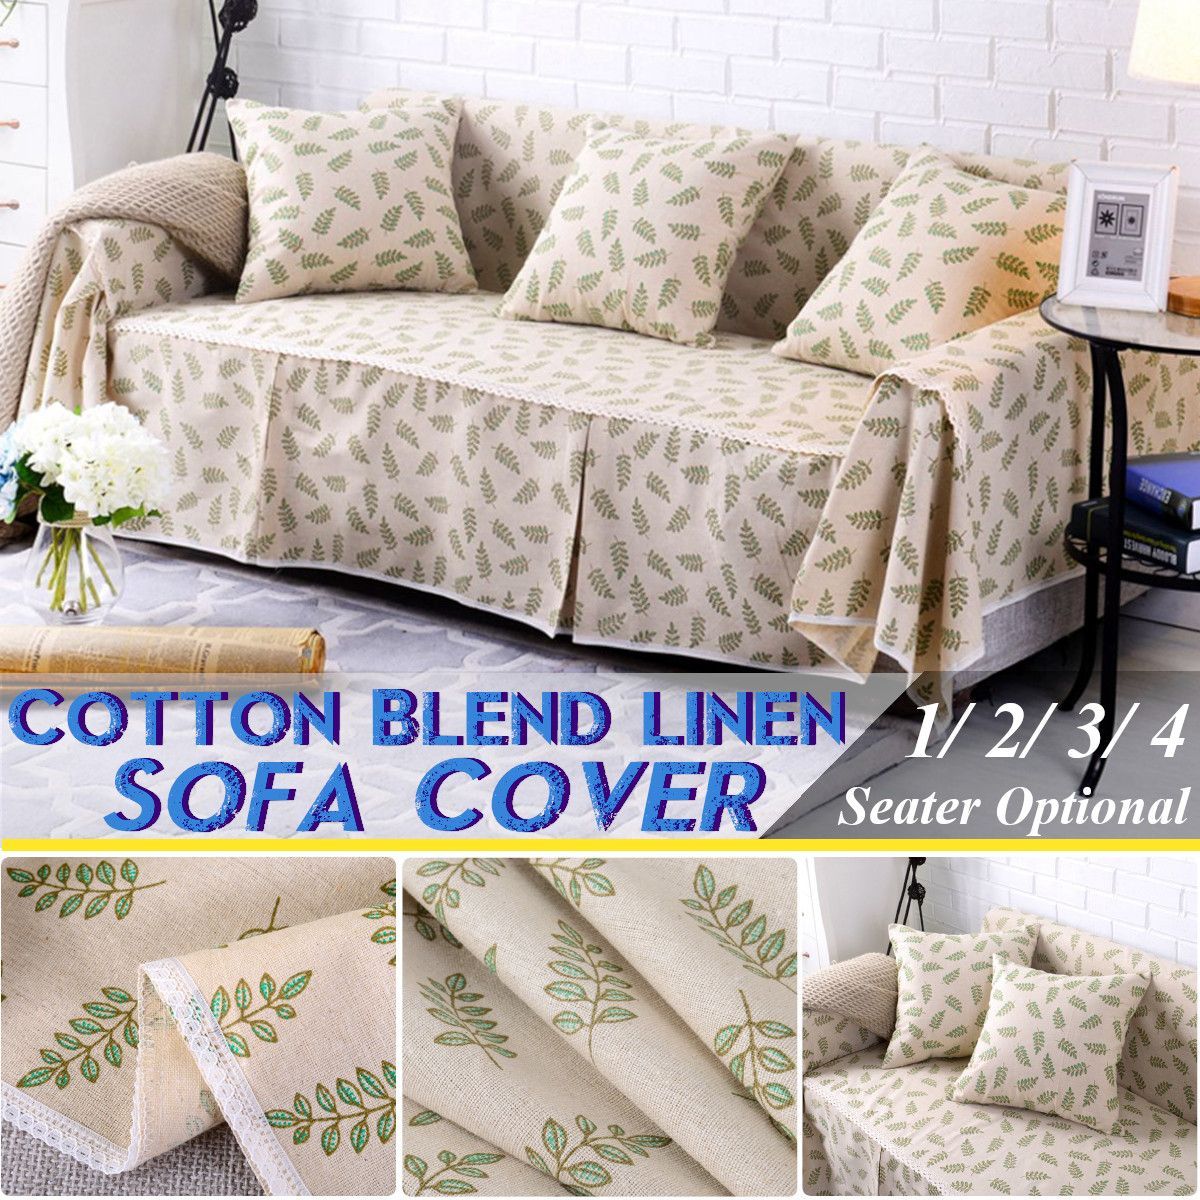 Sofa-Cover-Couch-Slipcover-Cotton-Blend-1-4-Seater-Pet-Dog-Seat-Covers-Protector-1454450